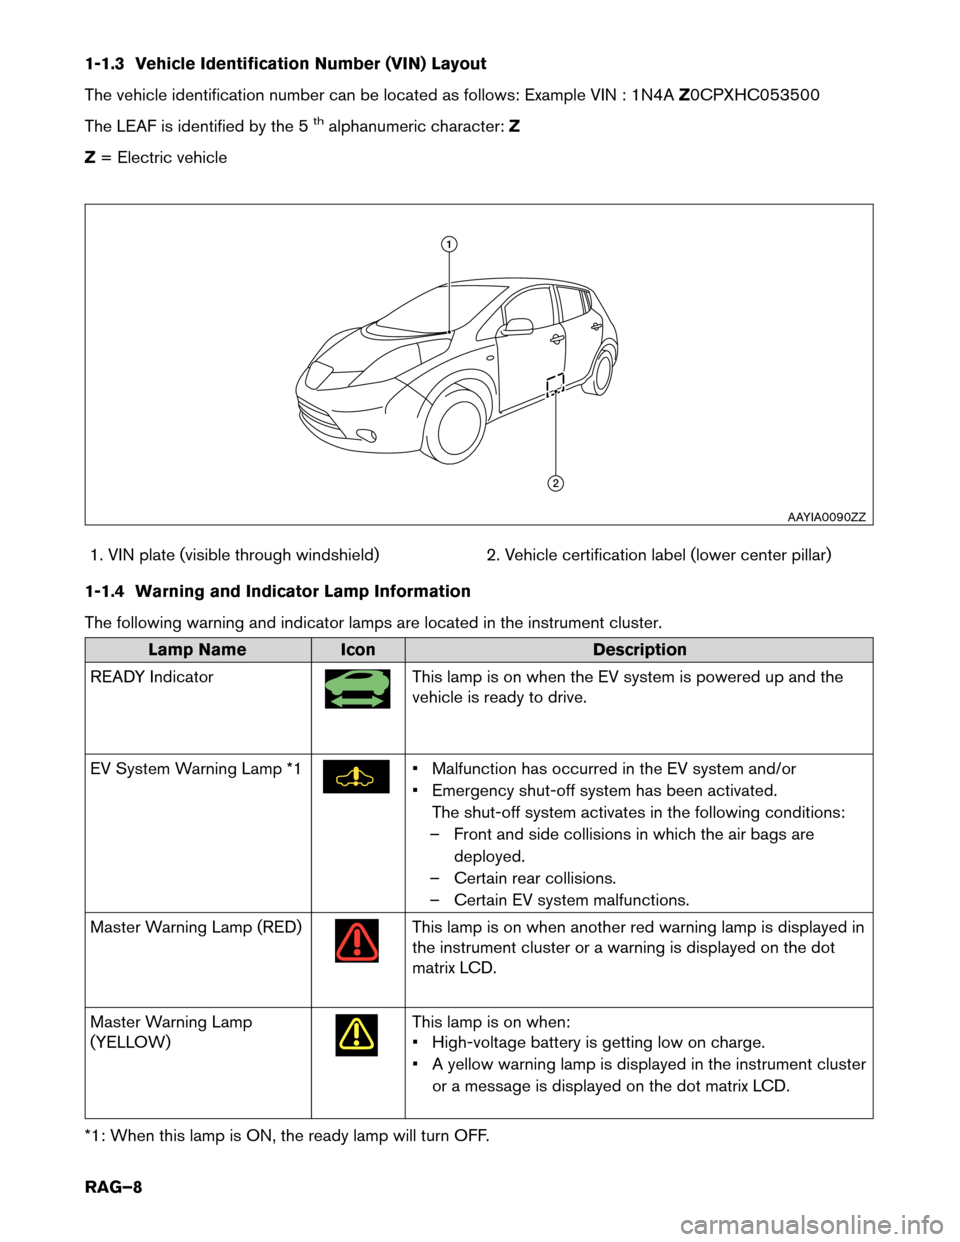 NISSAN LEAF 2017 1.G Roadside Assistance Guide 1-1.3 Vehicle Identification Number (VIN) Layout
The
vehicle identification number can be located as follows: Example VIN : 1N4A Z0CPXHC053500
The LEAF is identified by the 5
thalphanumeric character: